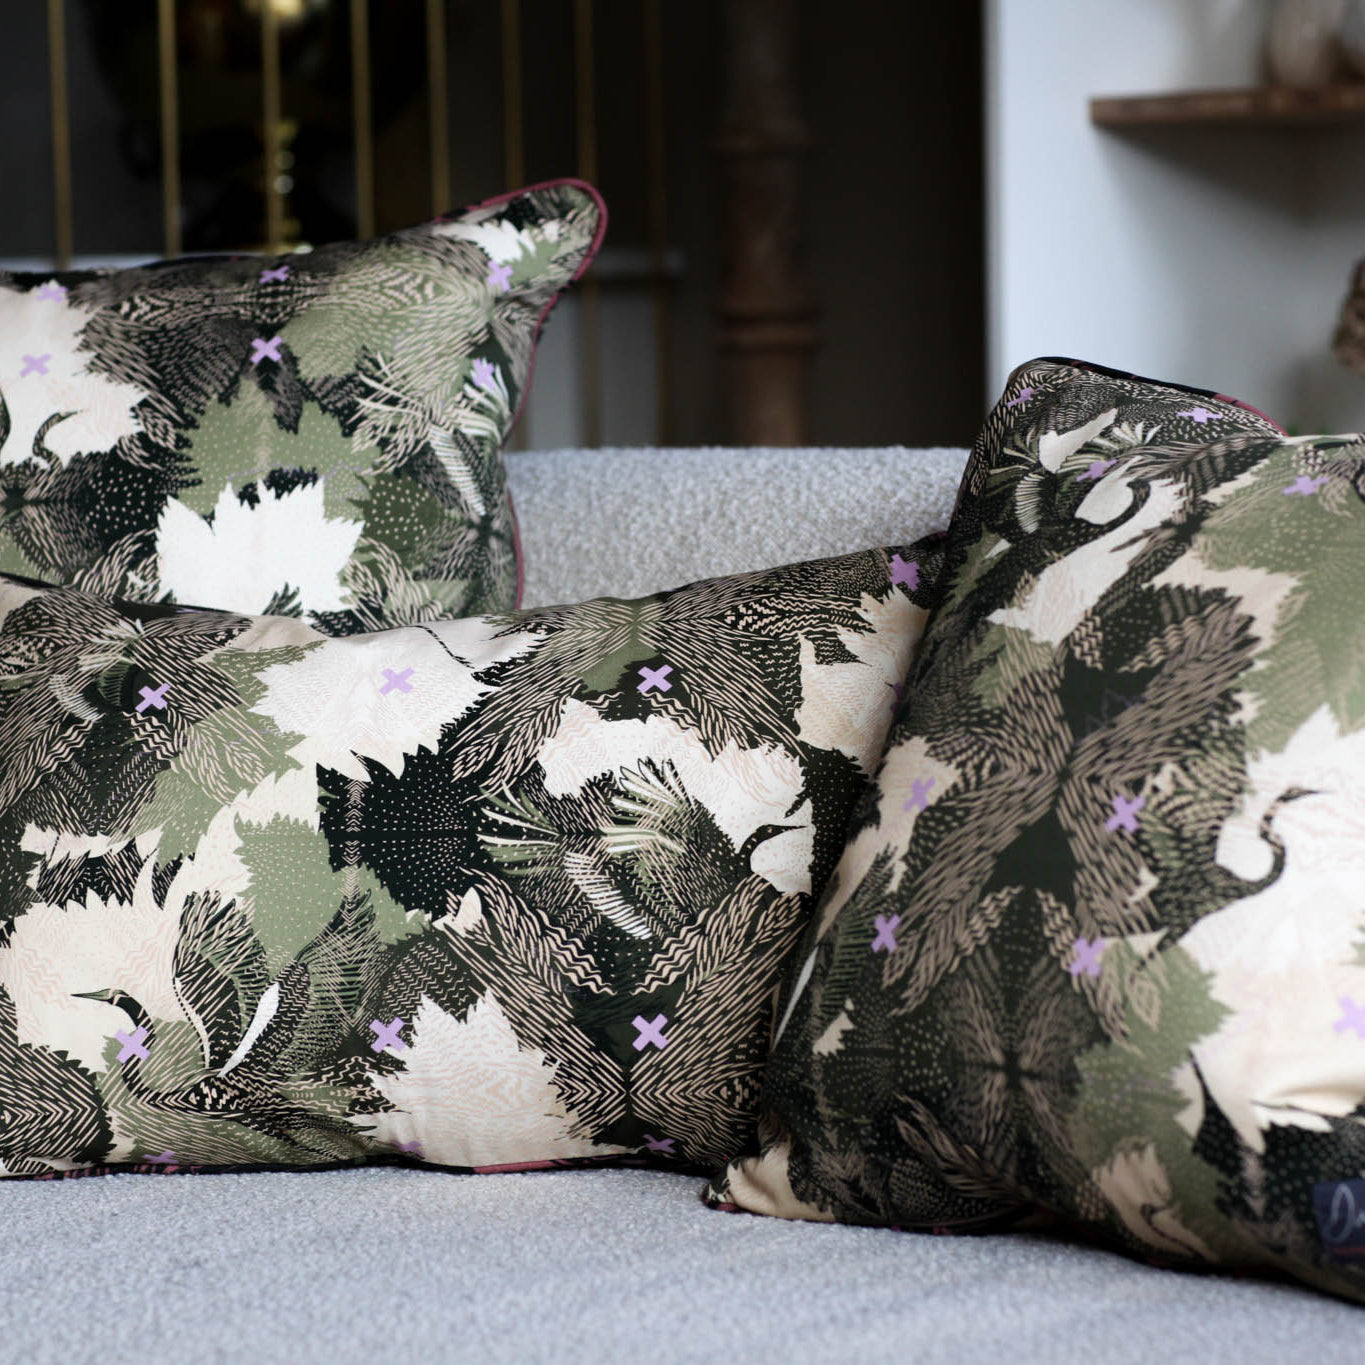 Hand printed cushions of different sizes on a white sofa